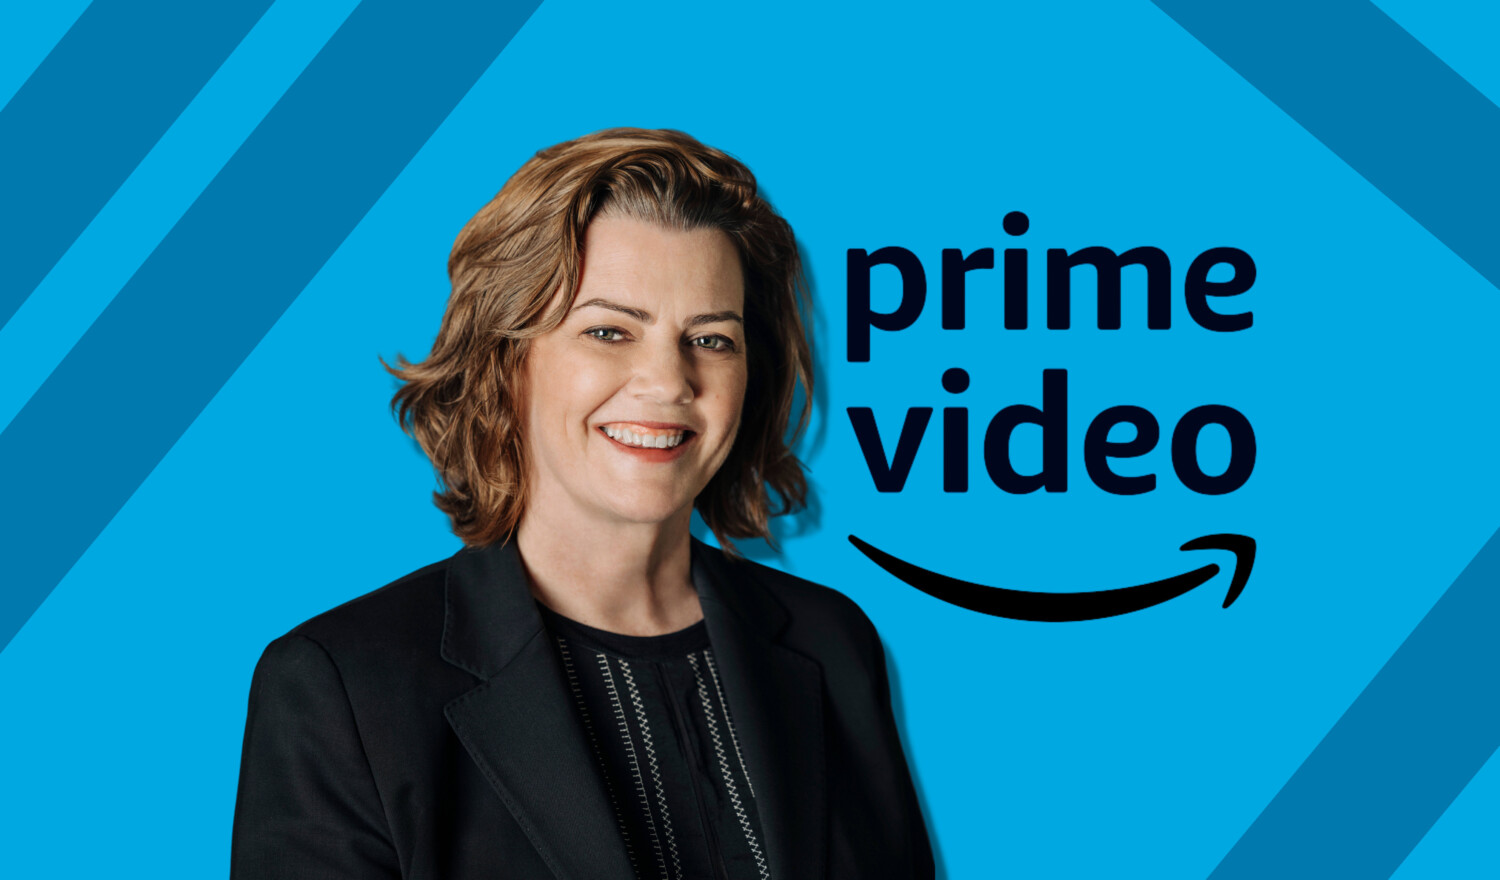 Prime Video VP Marie Donoghue on Building Up Amazon Sports